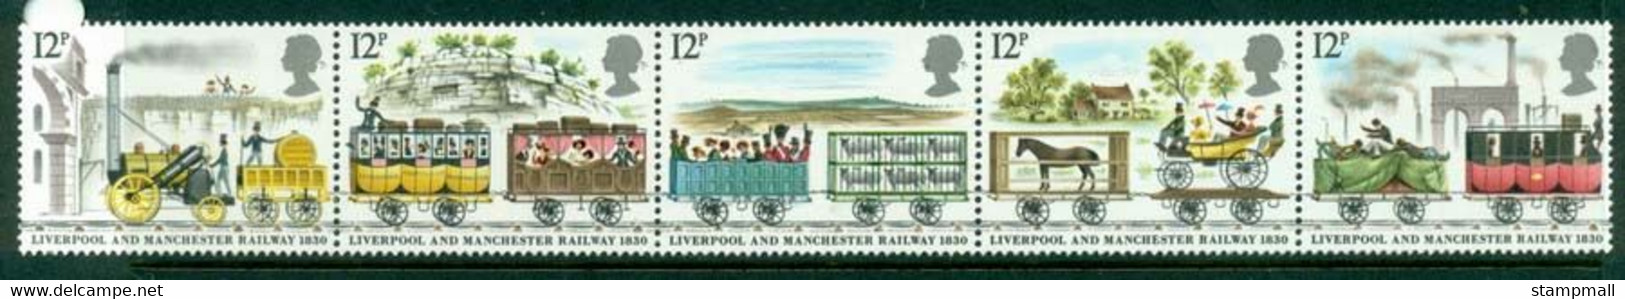 GB 1980 Liverpool-Manchester Railway MUH Lot19215 - Unclassified